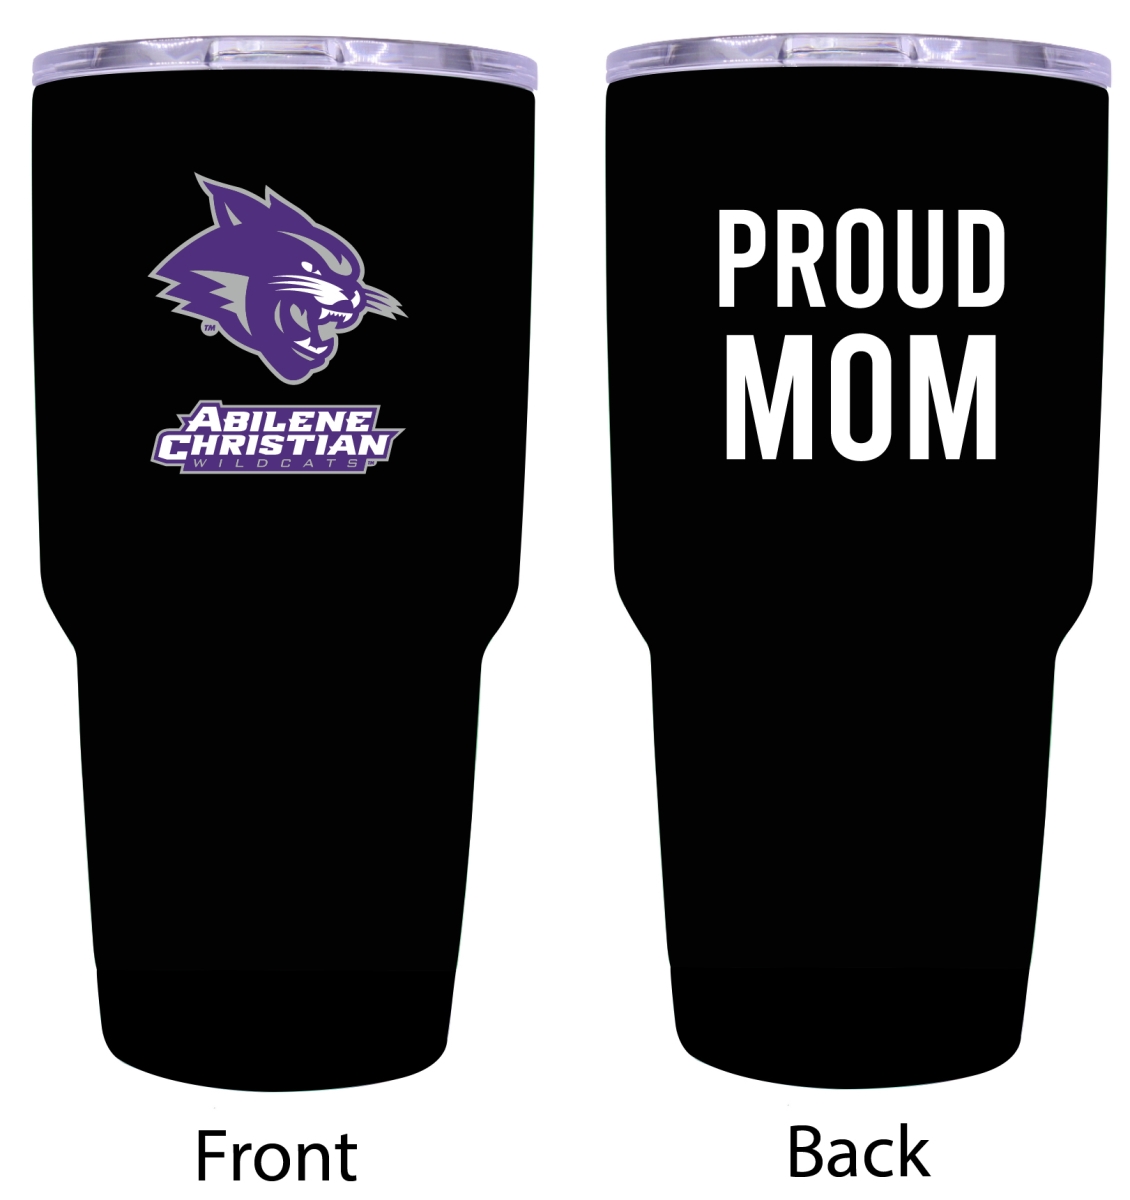 Picture of R & R Imports ITB-C-ACU20 MOM Abilene Christian University Proud Mom 20 oz Insulated Stainless Steel Tumblers